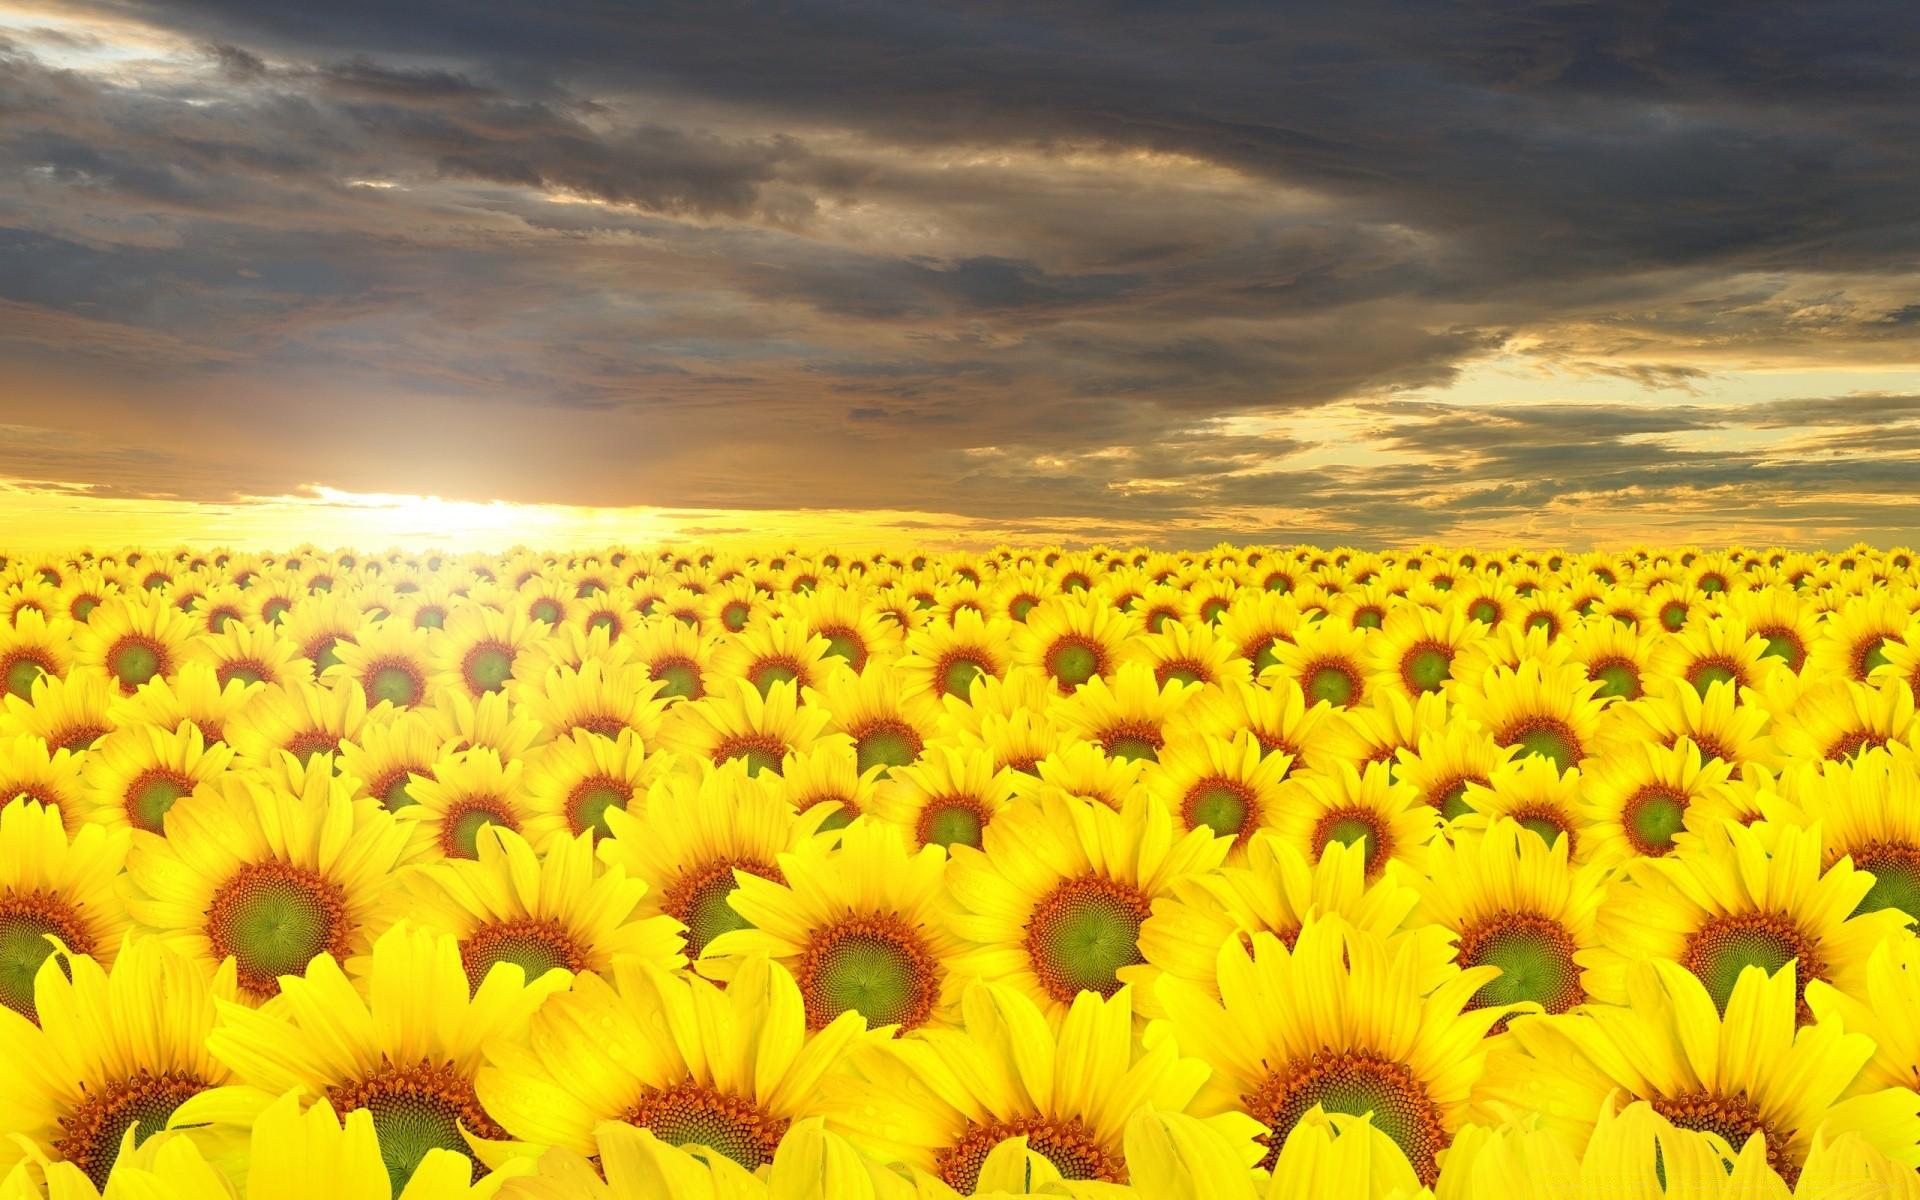 Sunflowers Field. Android wallpaper for free